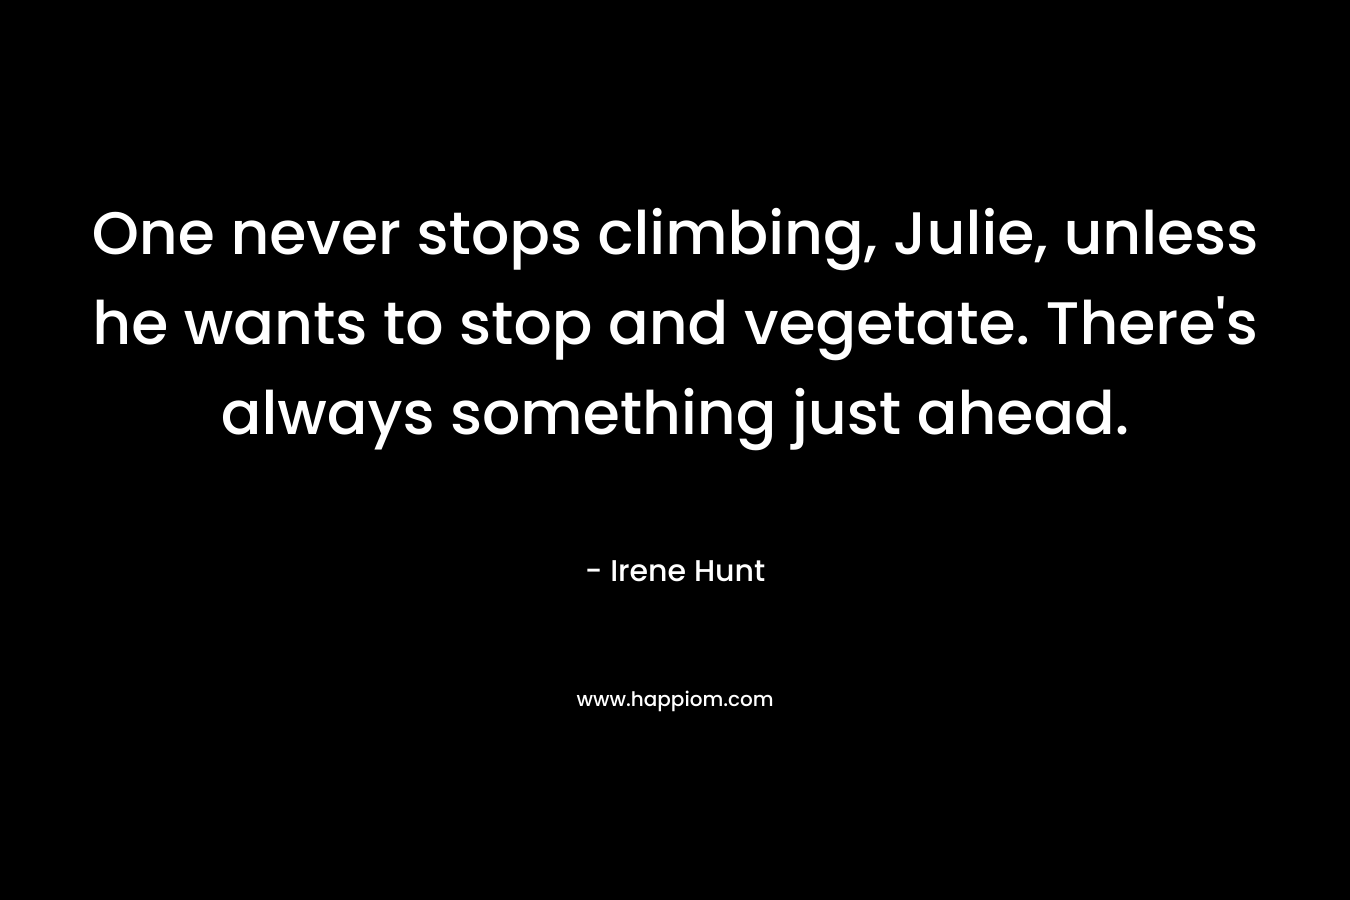 One never stops climbing, Julie, unless he wants to stop and vegetate. There's always something just ahead.